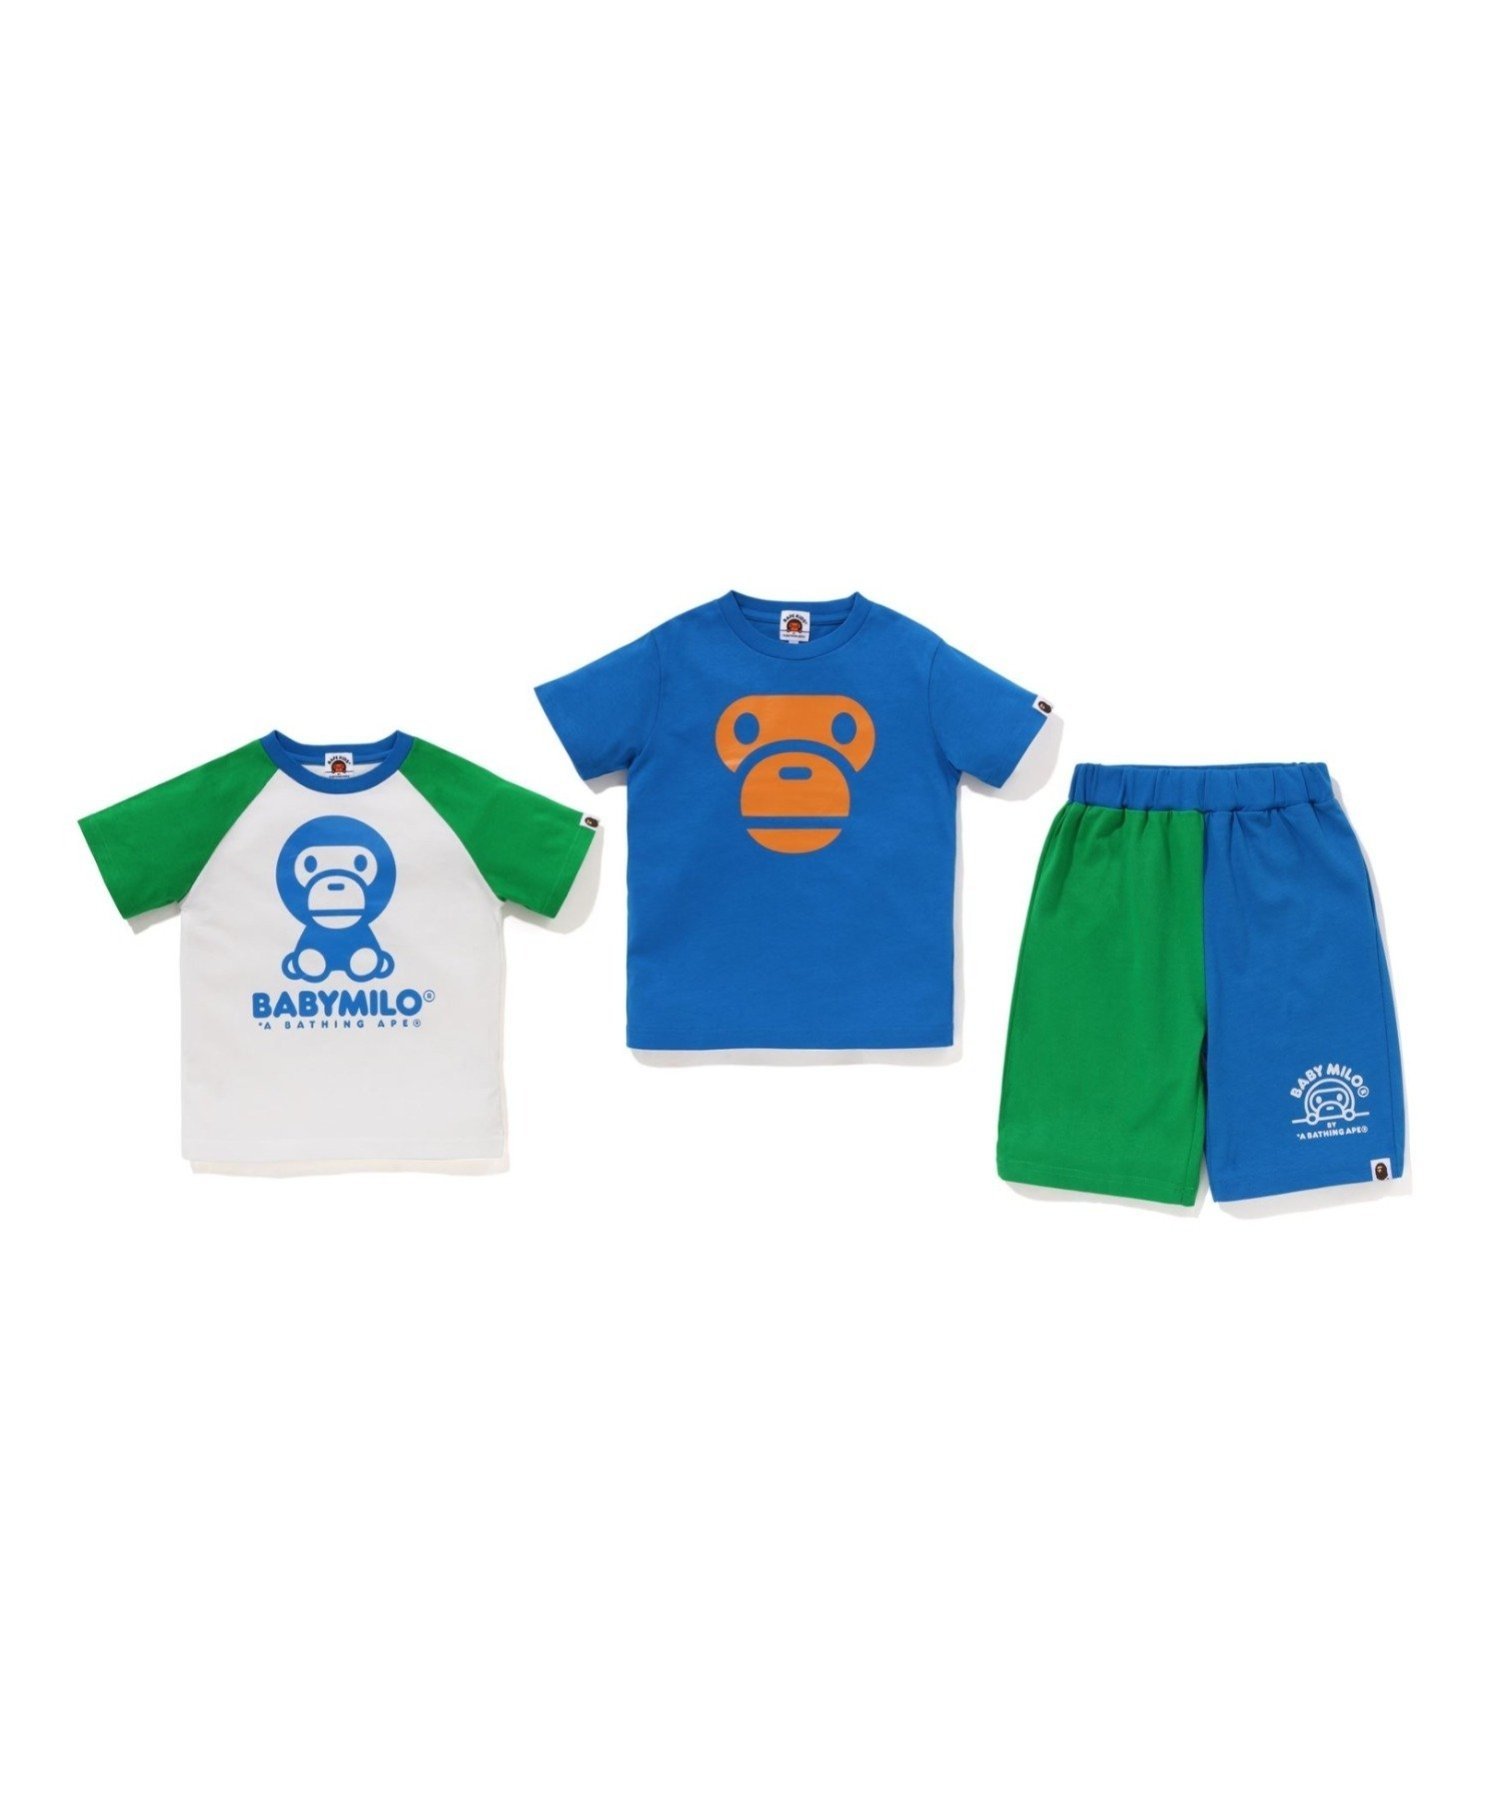 A BATHING APE BABY MILO KIDS GIFT SET ア ベイシング エイプ 福袋・ギフト・その他 ギフトセット ブ..